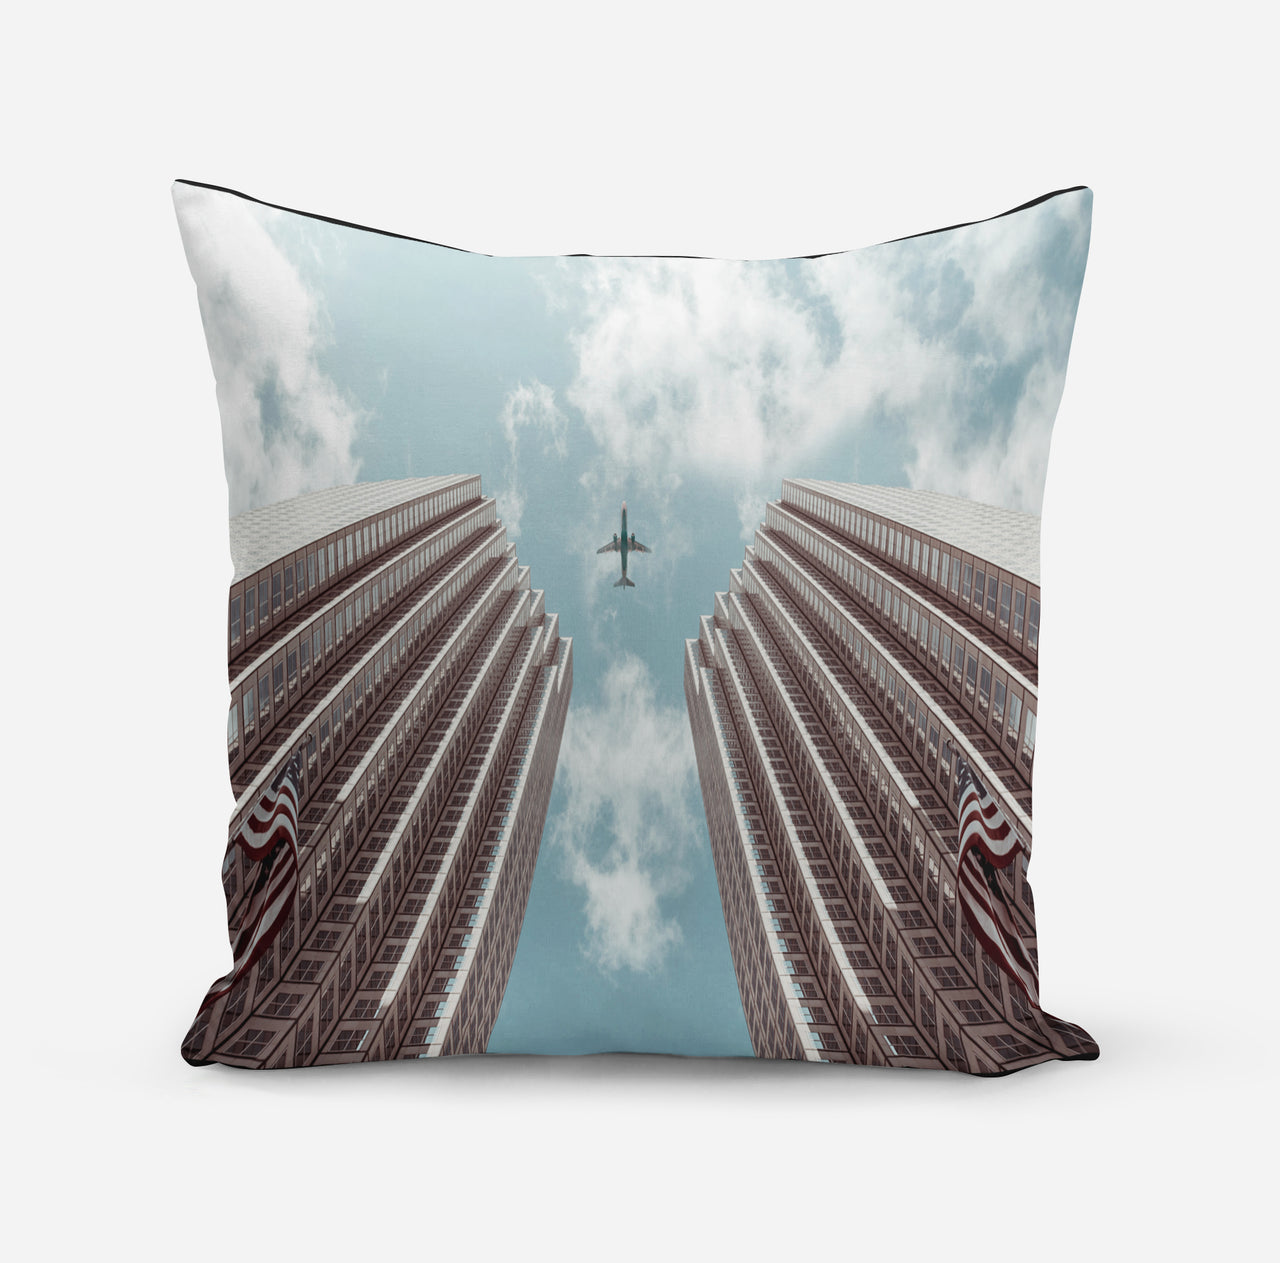 Airplane Flying over Big Buildings Designed Pillows